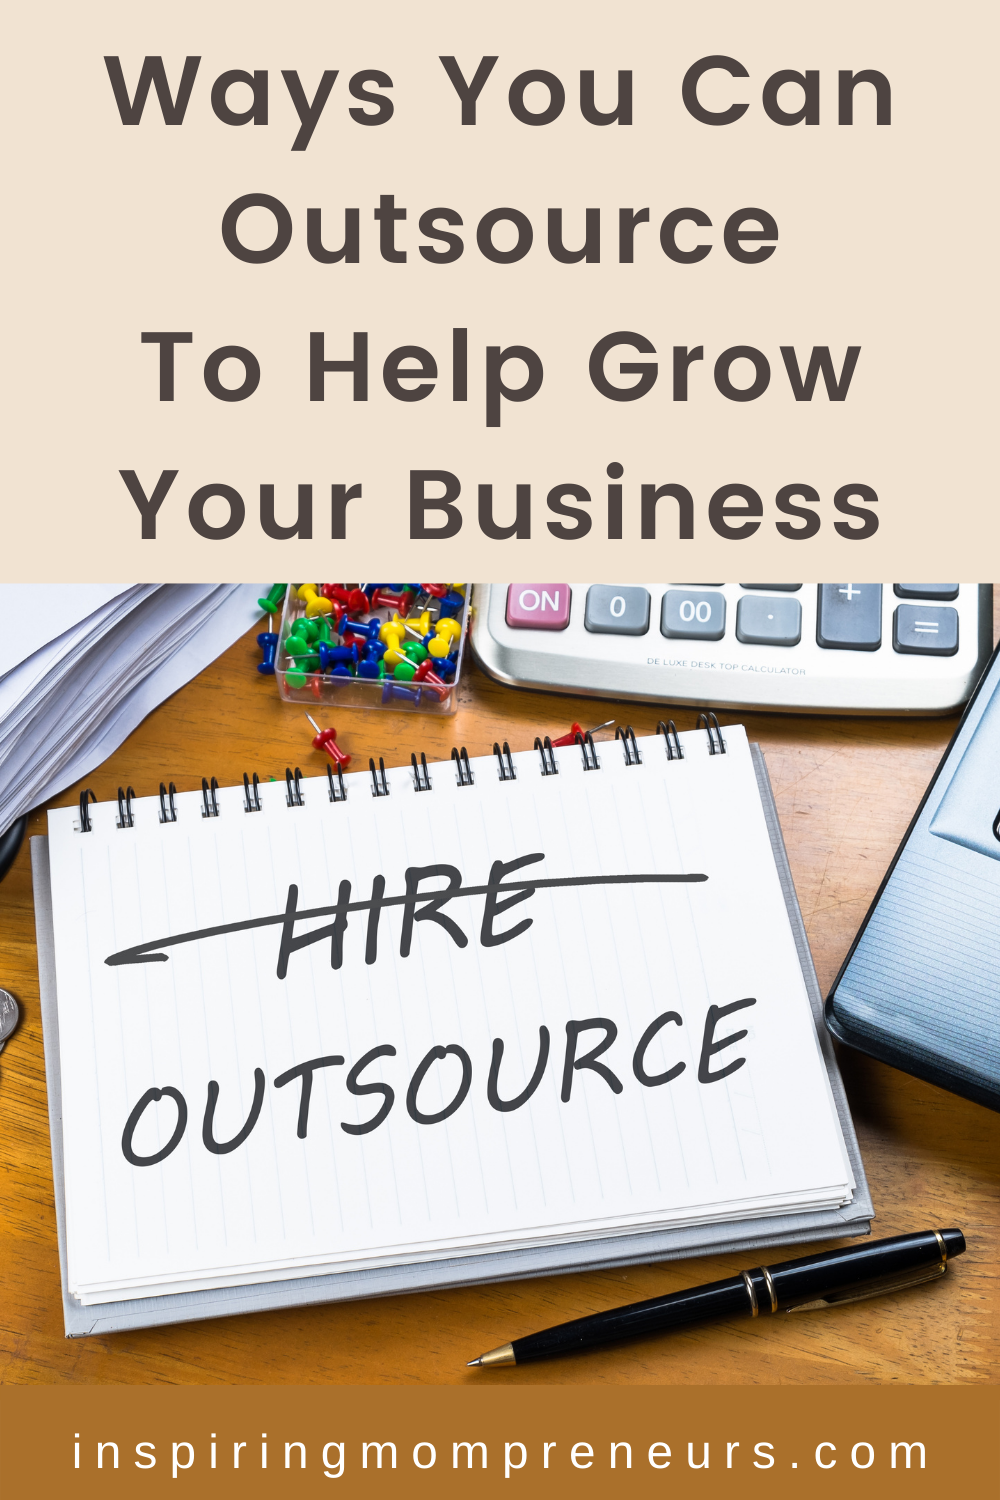 If you’re looking for ways that outsourcing can boost your business, take a look at some of the following ideas and see how you can grow your business.